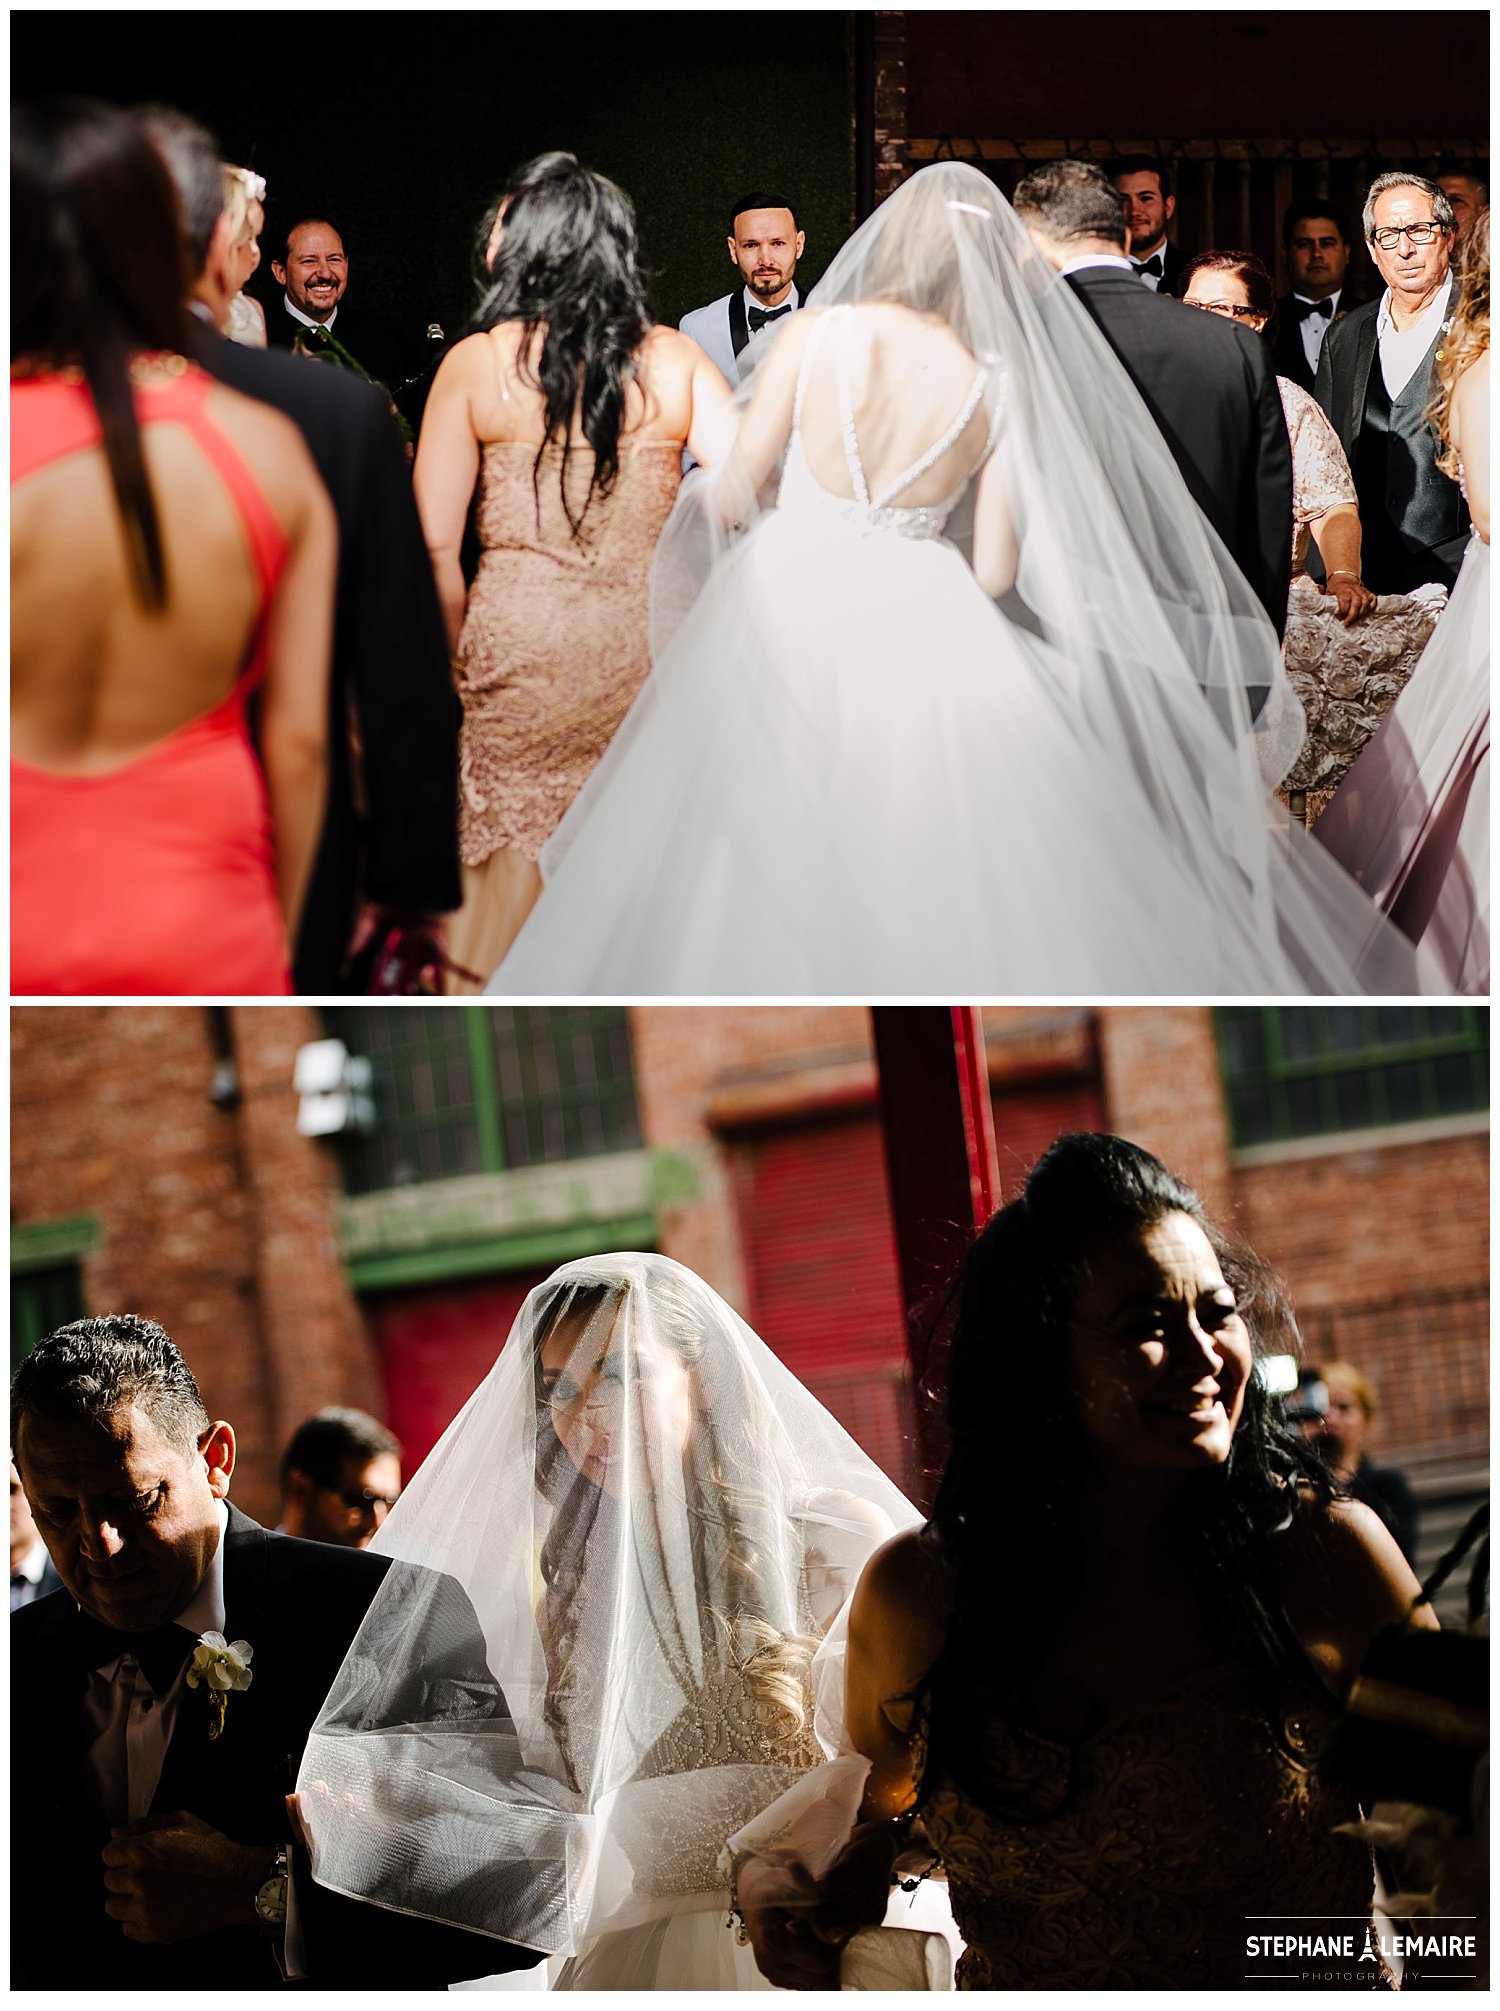 Wedding ceremony at Epic Railyard in El Paso Texas by Stephane Lemaire photography